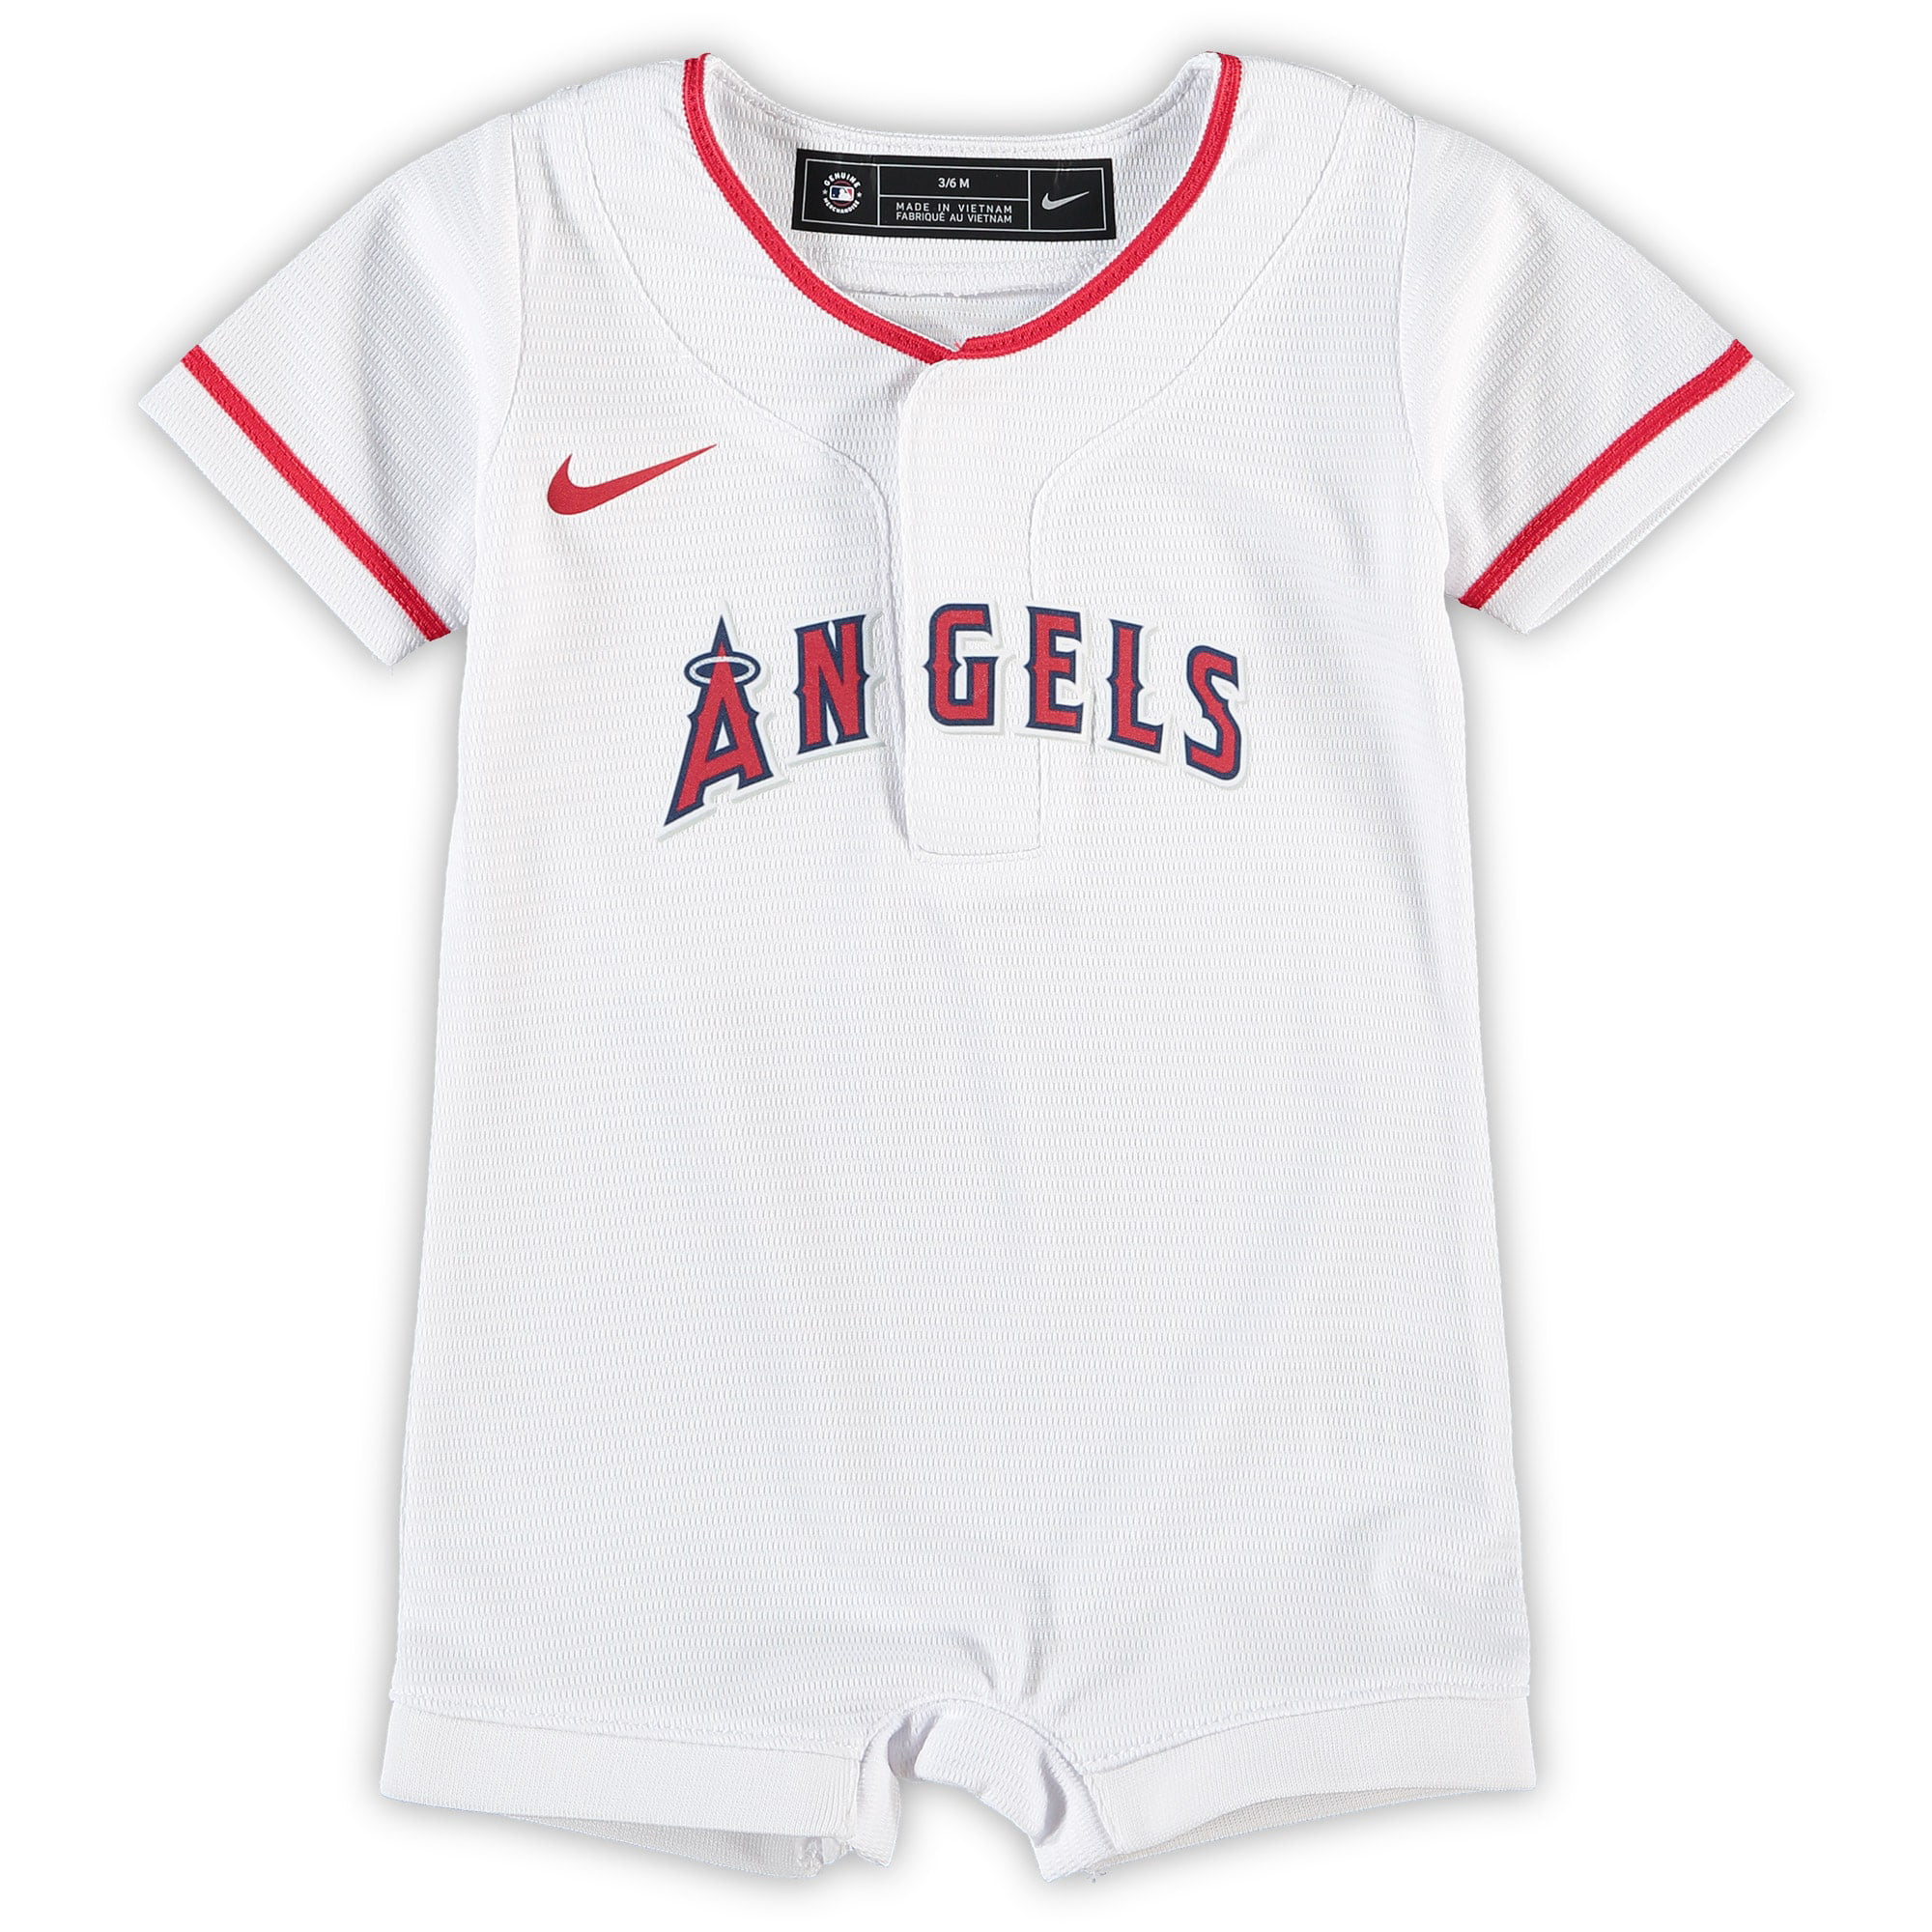 Newborn & Infant Nike White Los Angeles Angels Official Jersey